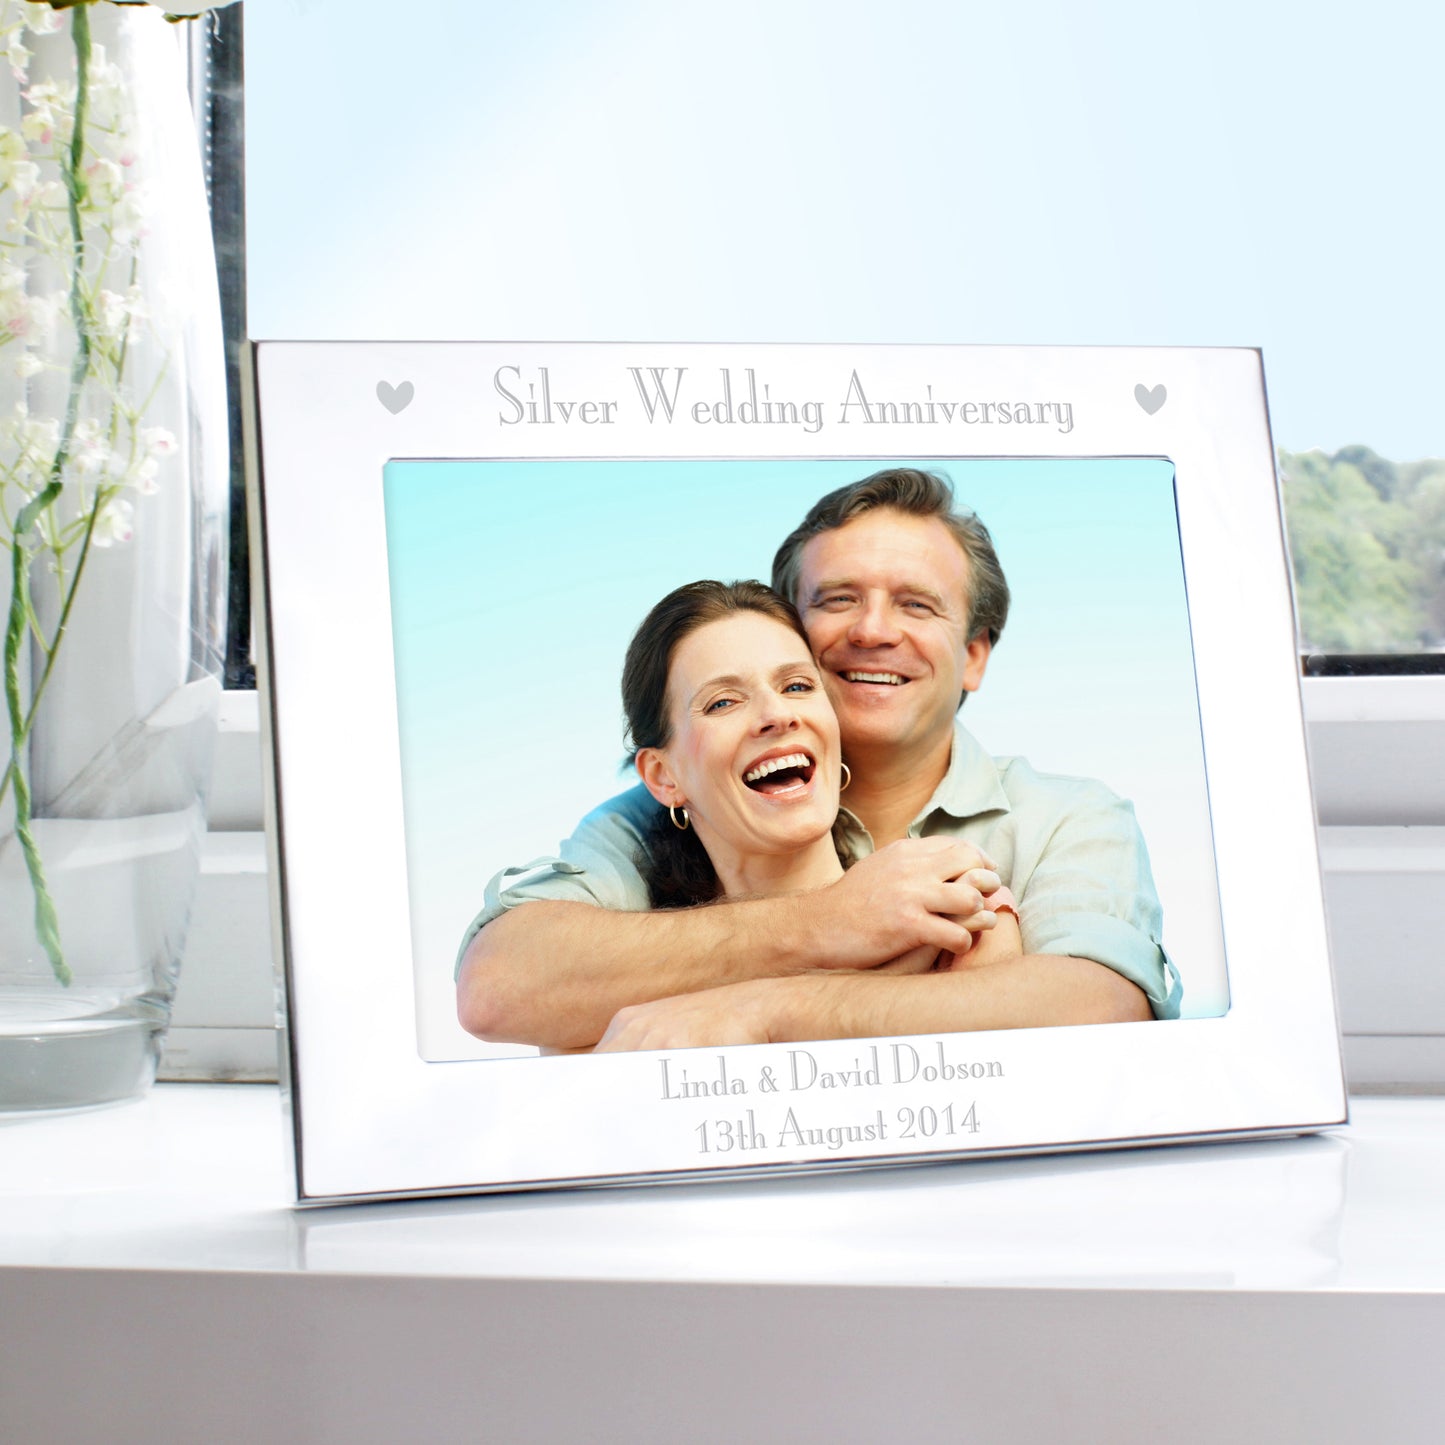 Personalised  Silver Anniversary 7x5 Landscape Photo Frame - Personalise It!